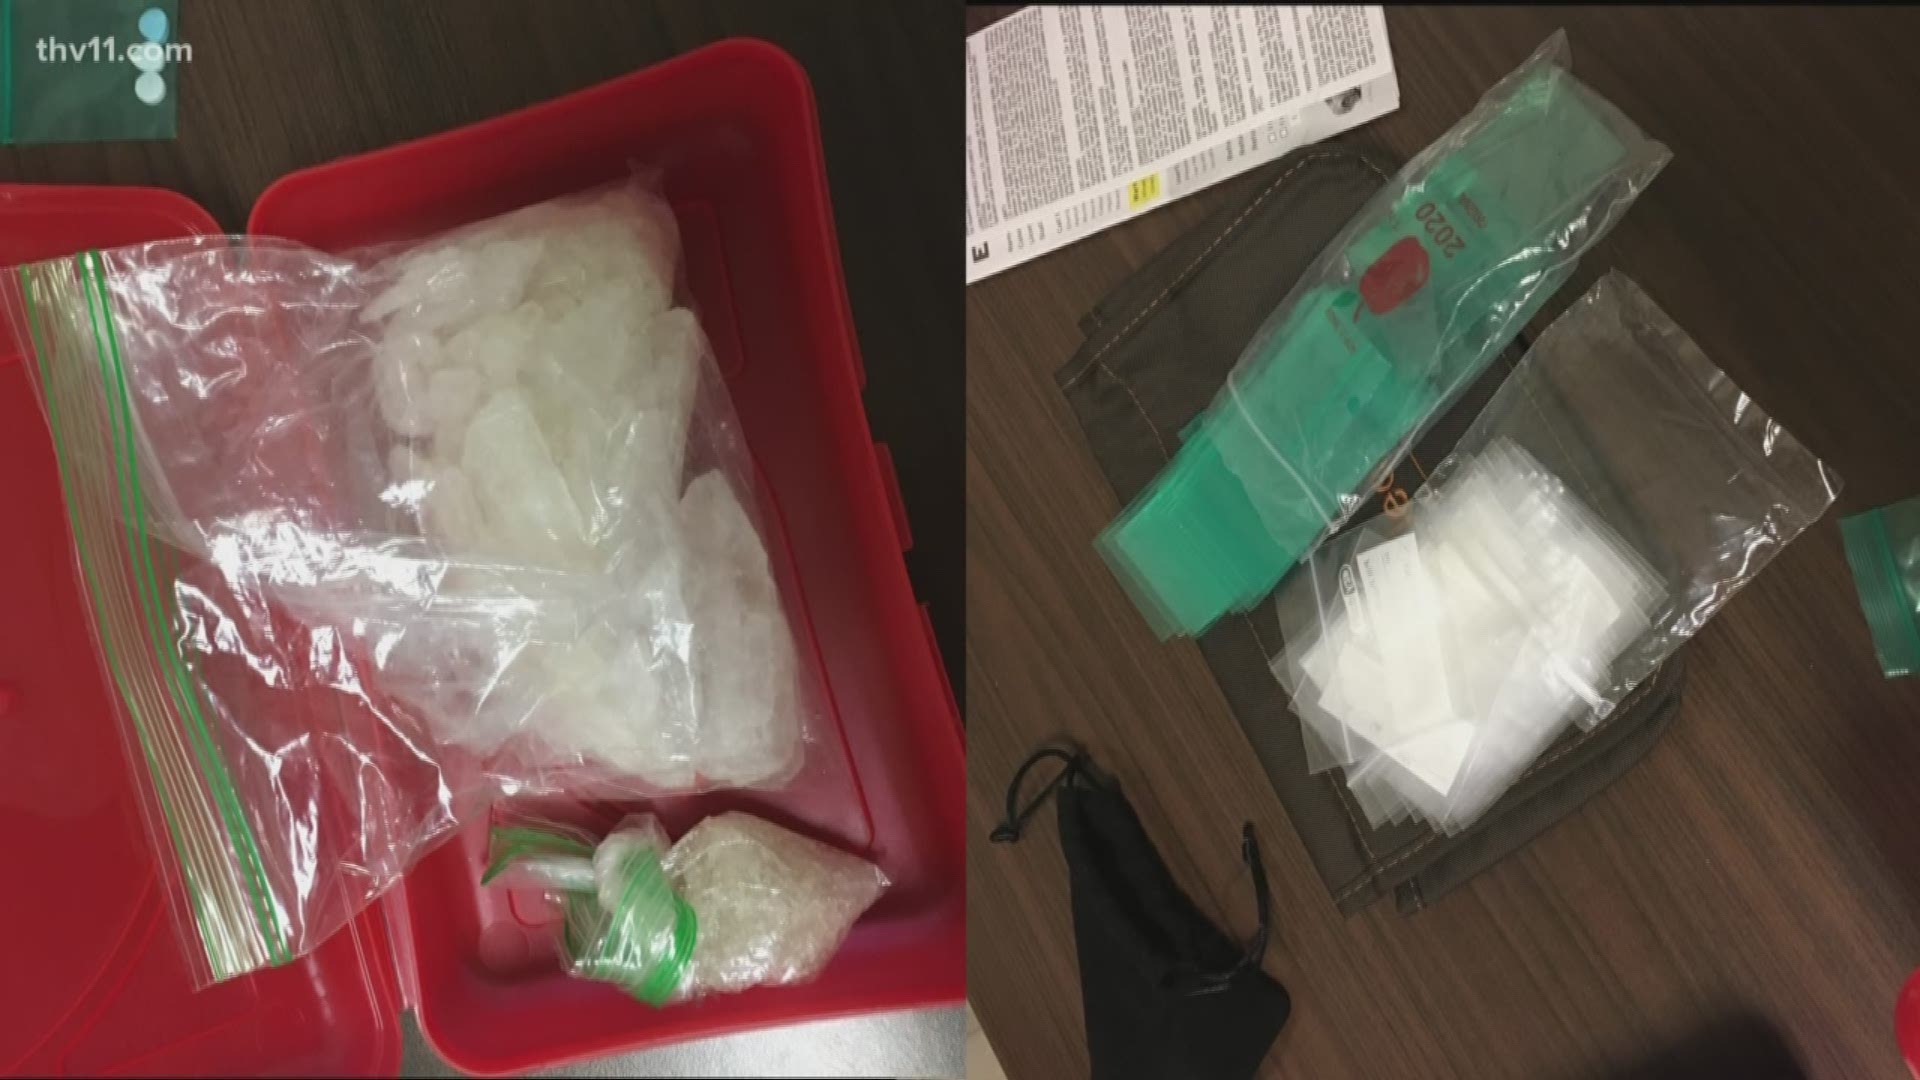 Police checked on a man passed out at a fast food joint, and ended up making a major meth bust.